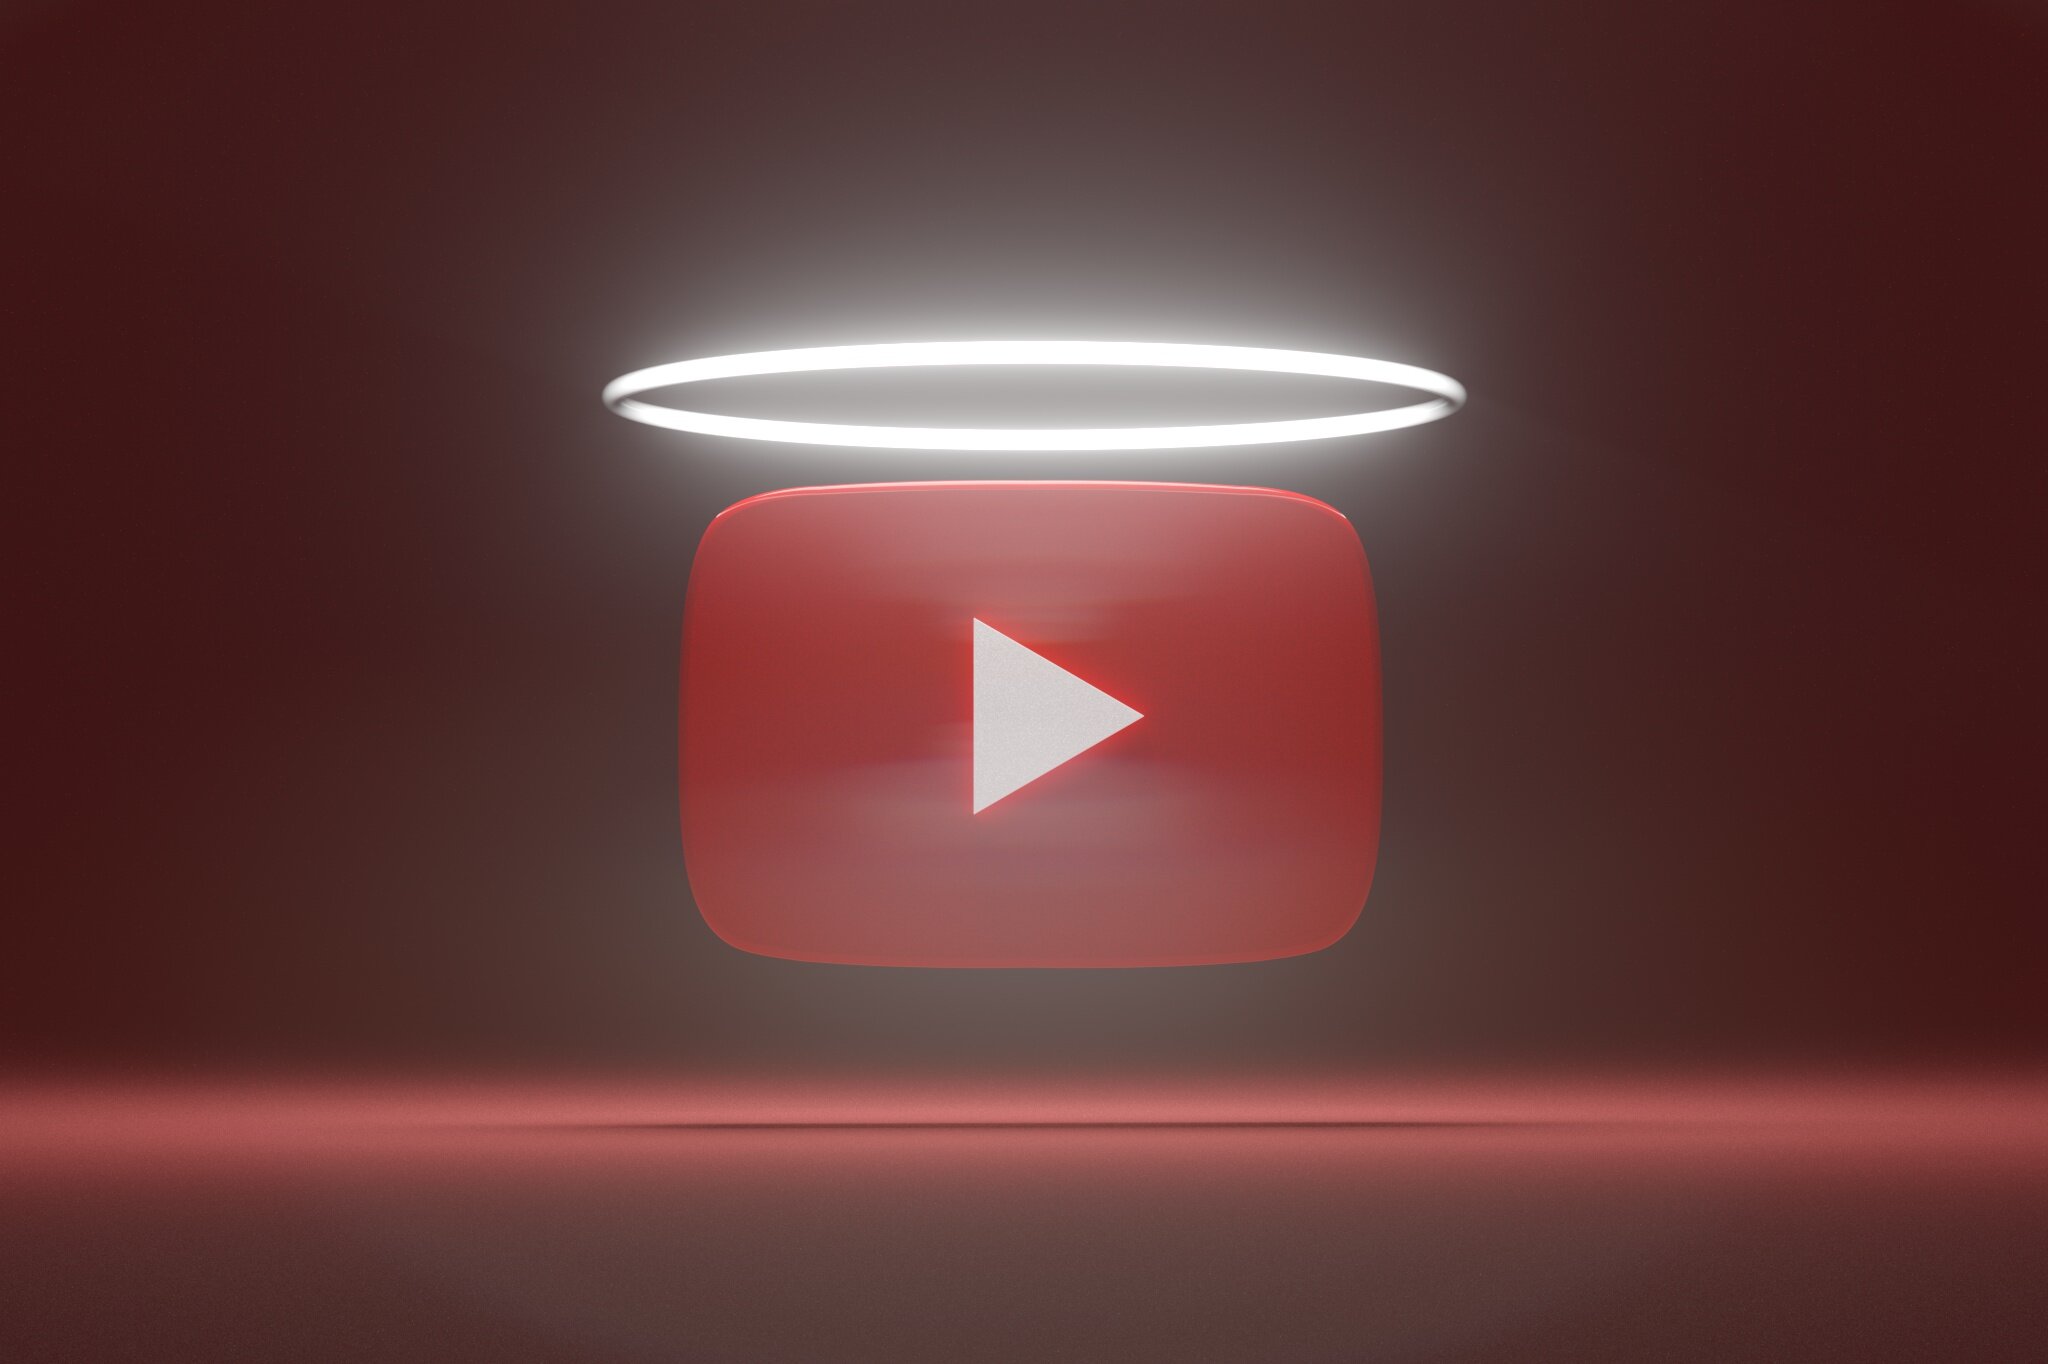 Monetize your YouTube